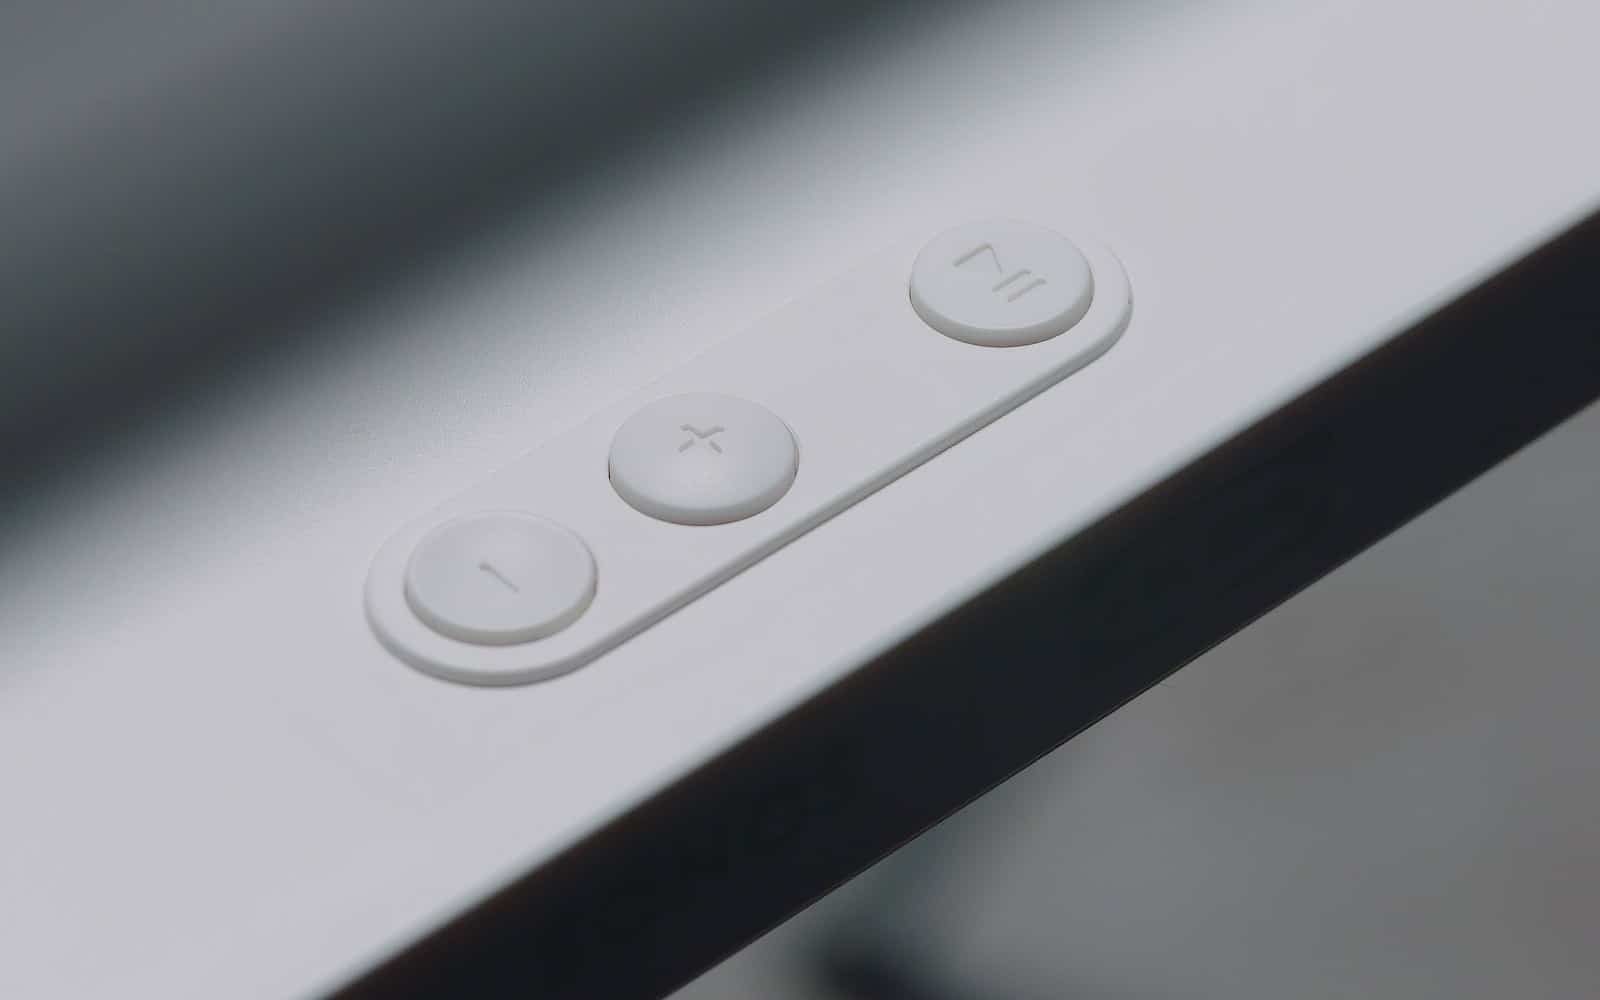 The controls on the IKEA Symfonisk Picture Frame WiFi speaker.